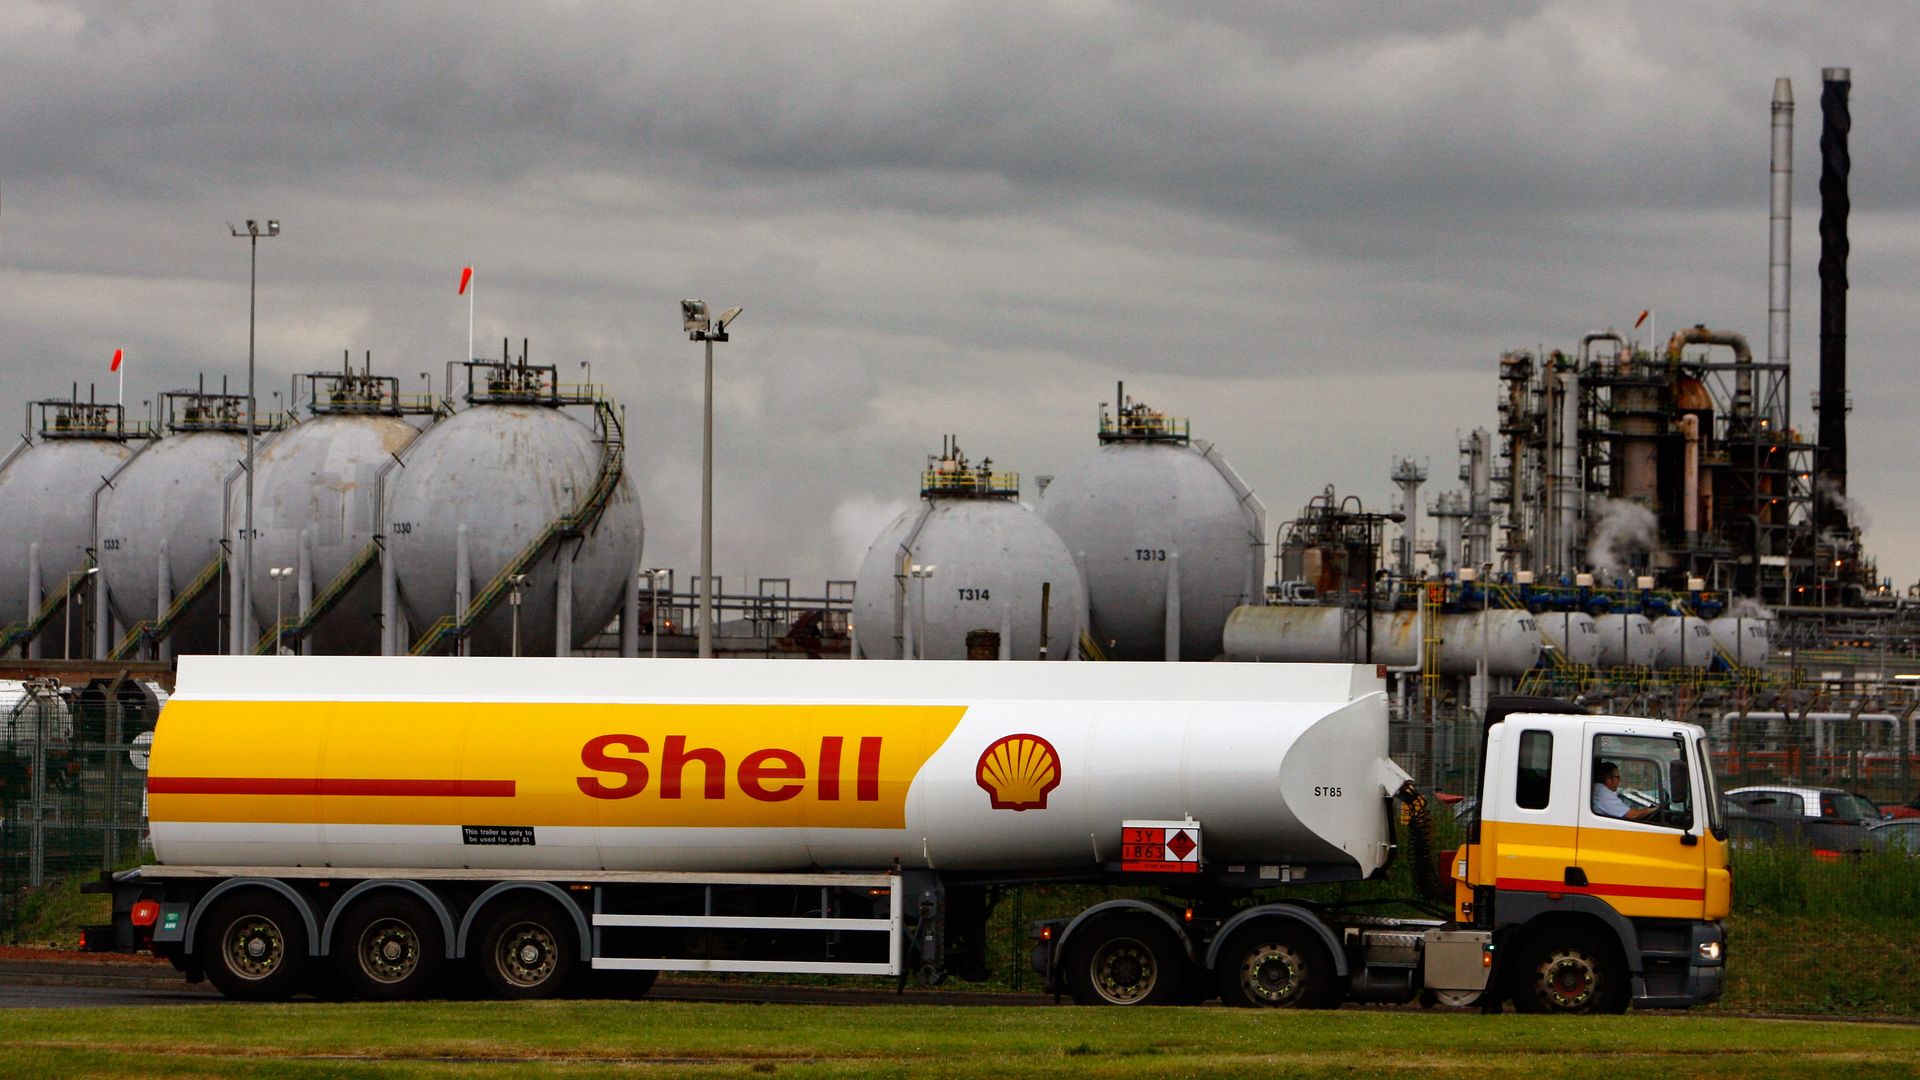 In this image, a Shell brand tanker sits in front of a plant on a cloudy day. 